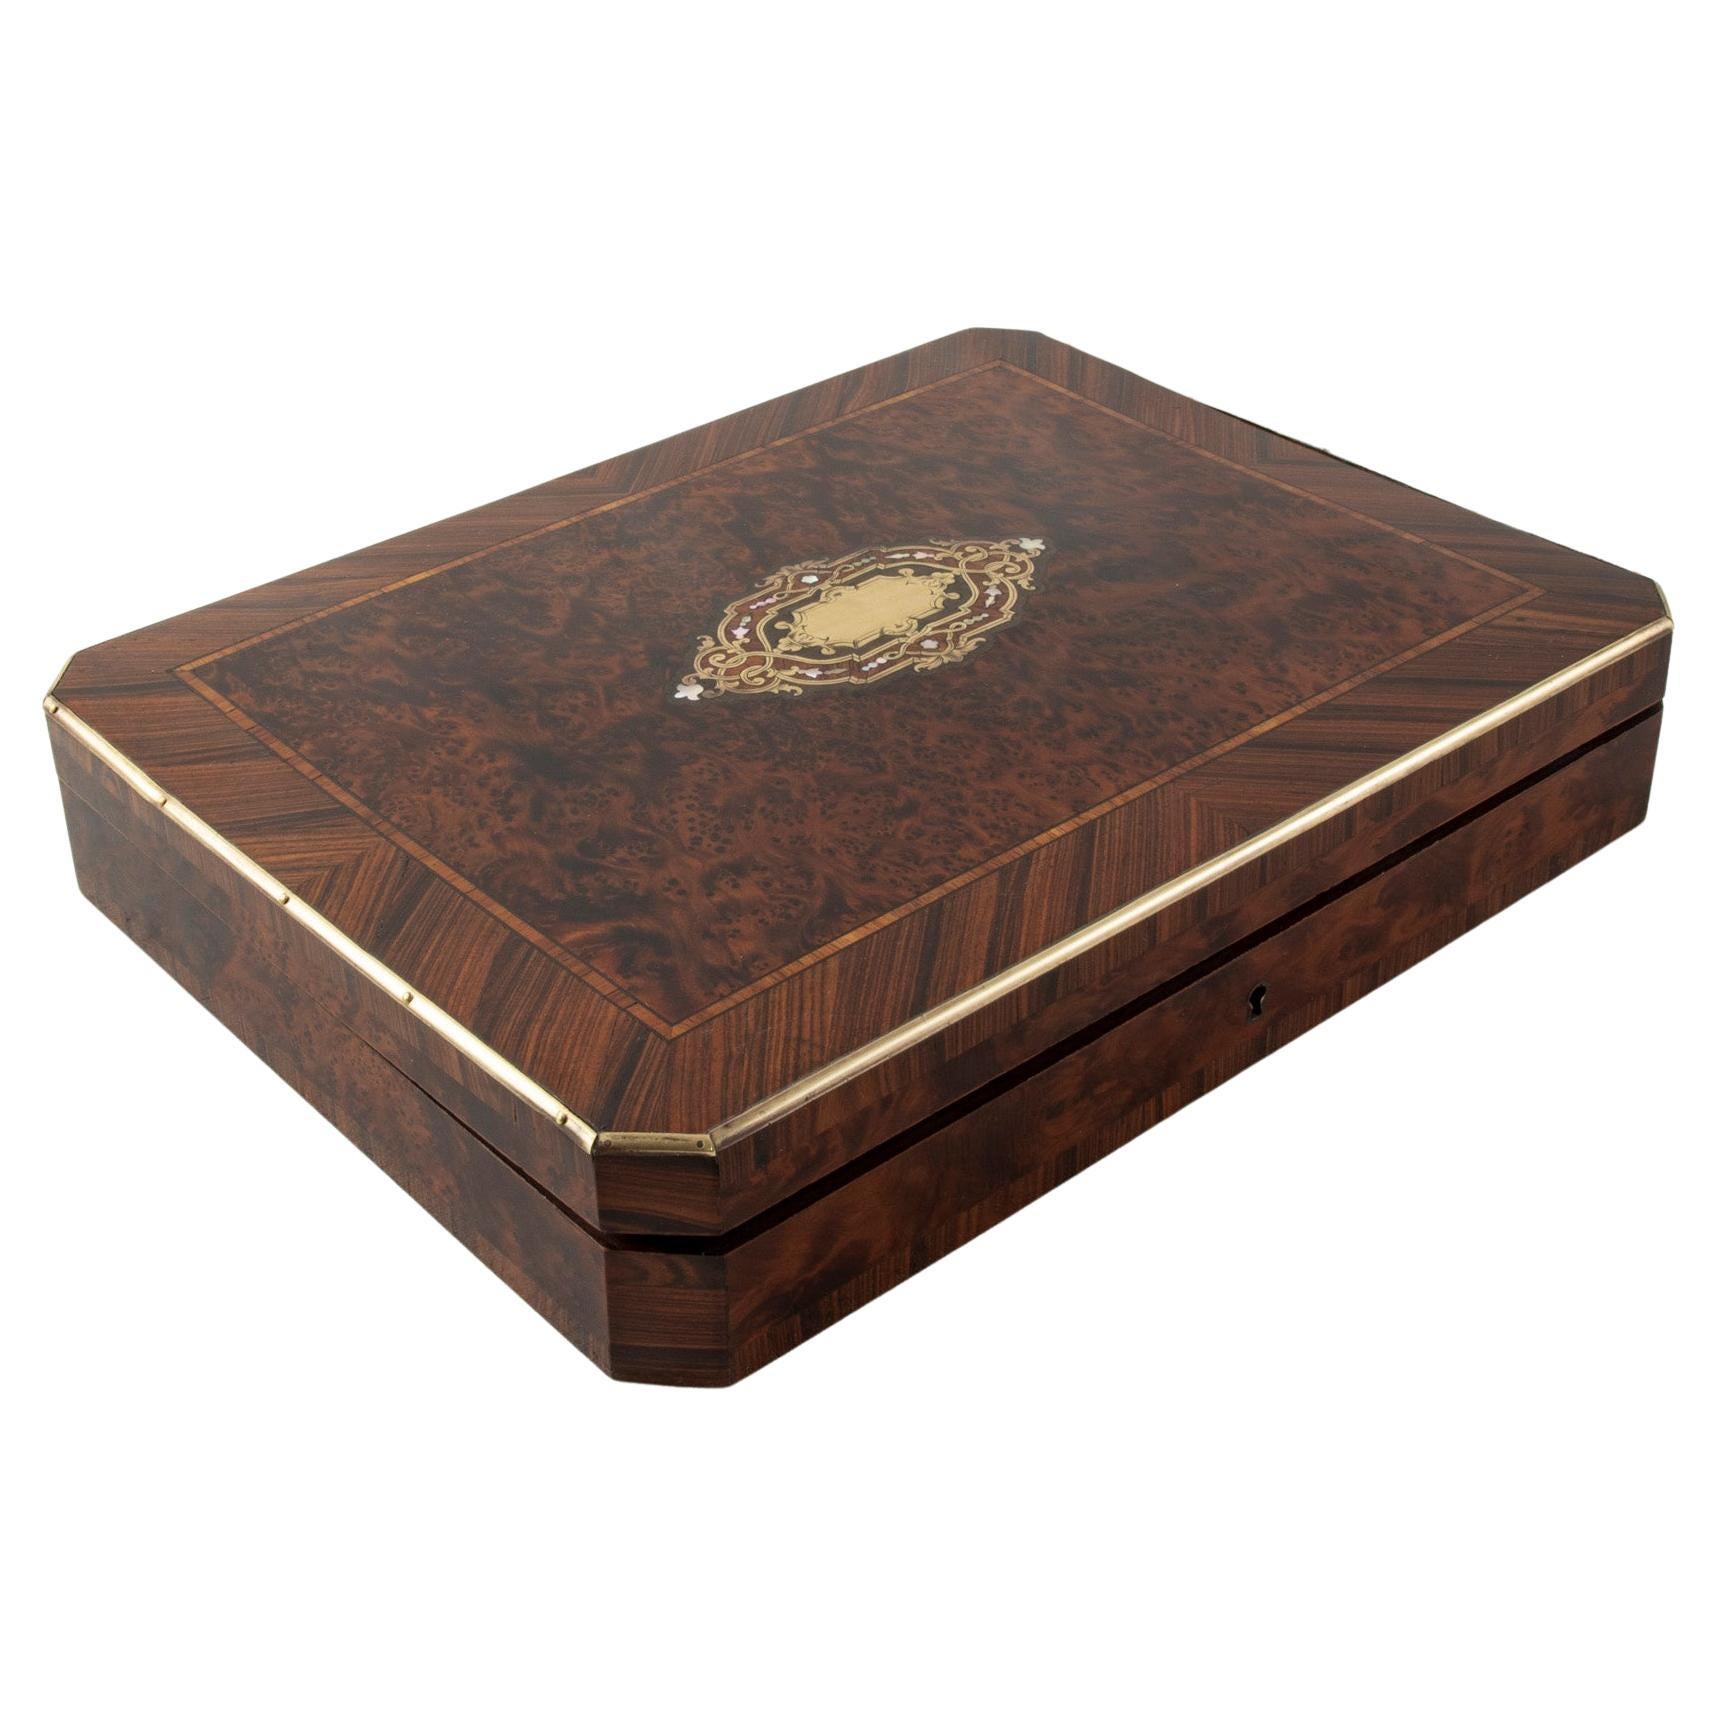 Late 19th Century French Napoleon III Period Marquetry Game Box, Mother of Pearl